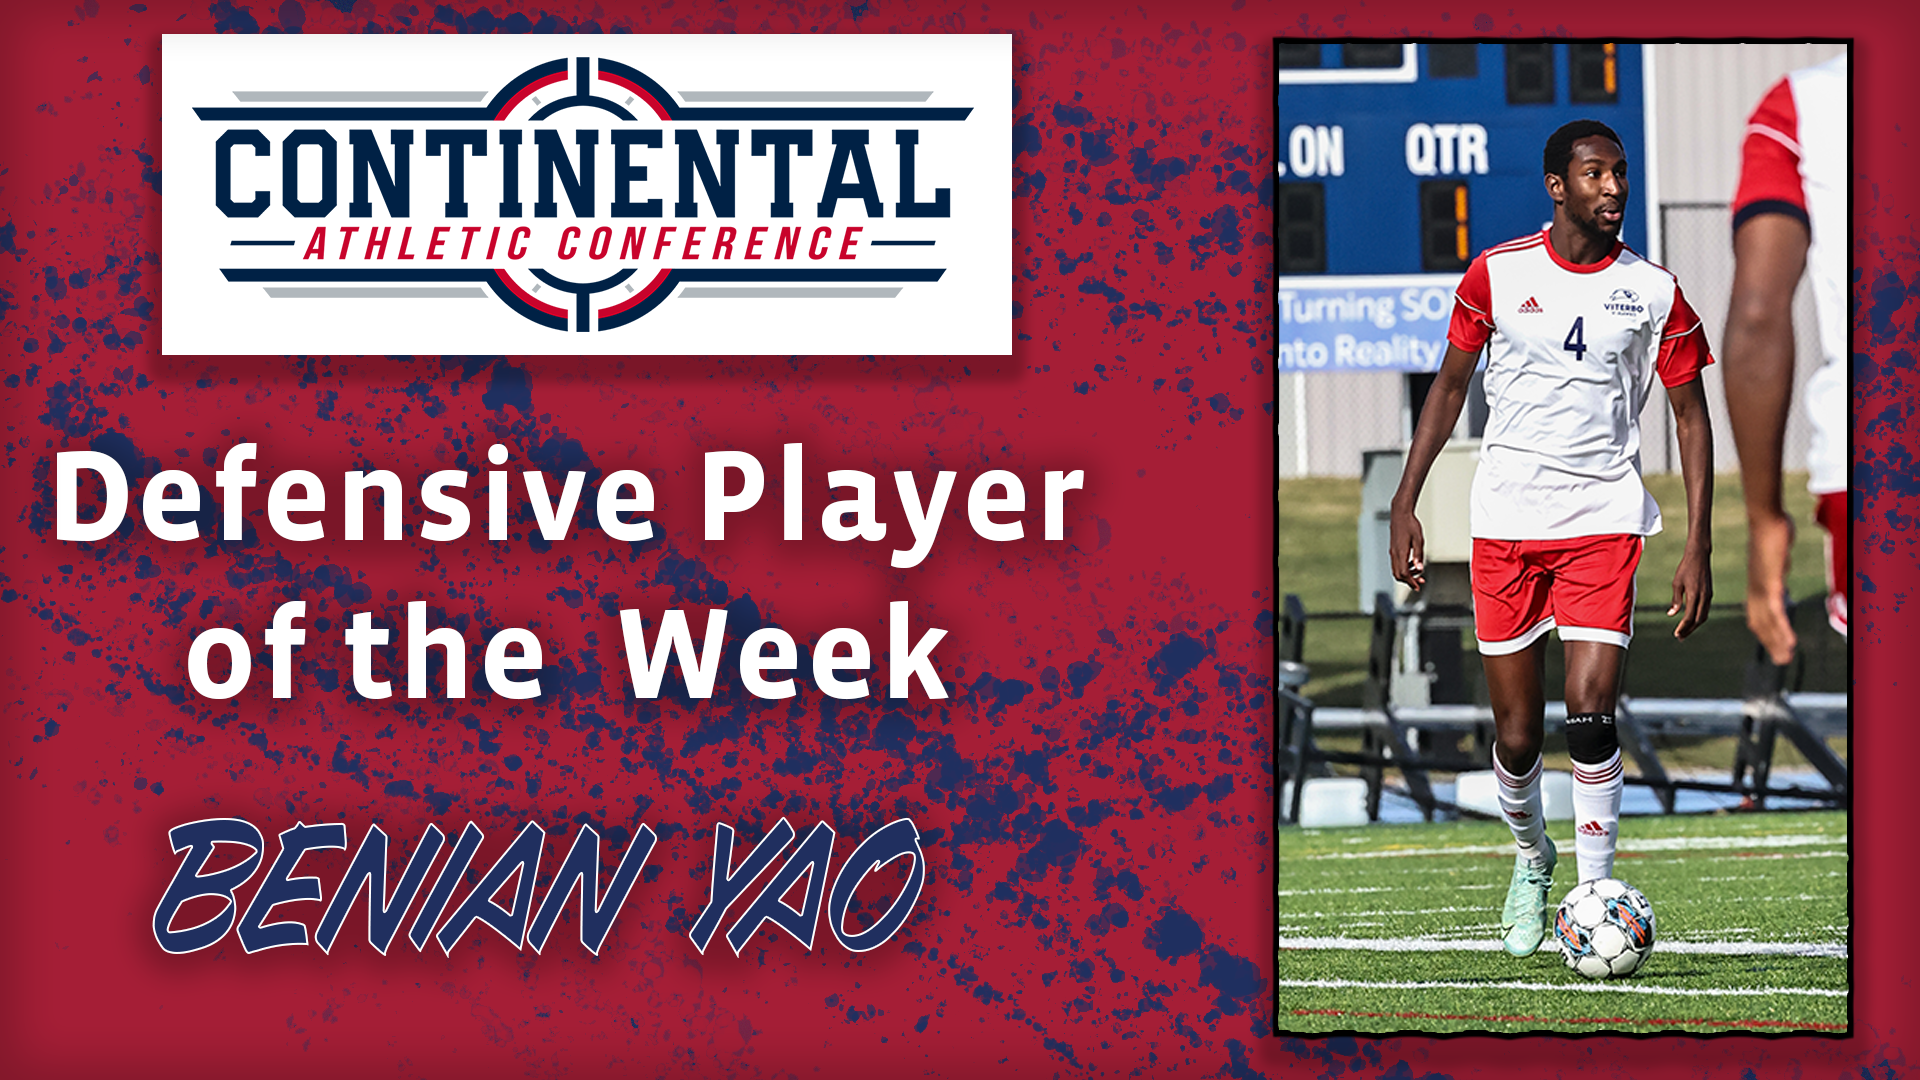 Yao Named Defensive Player of the Week